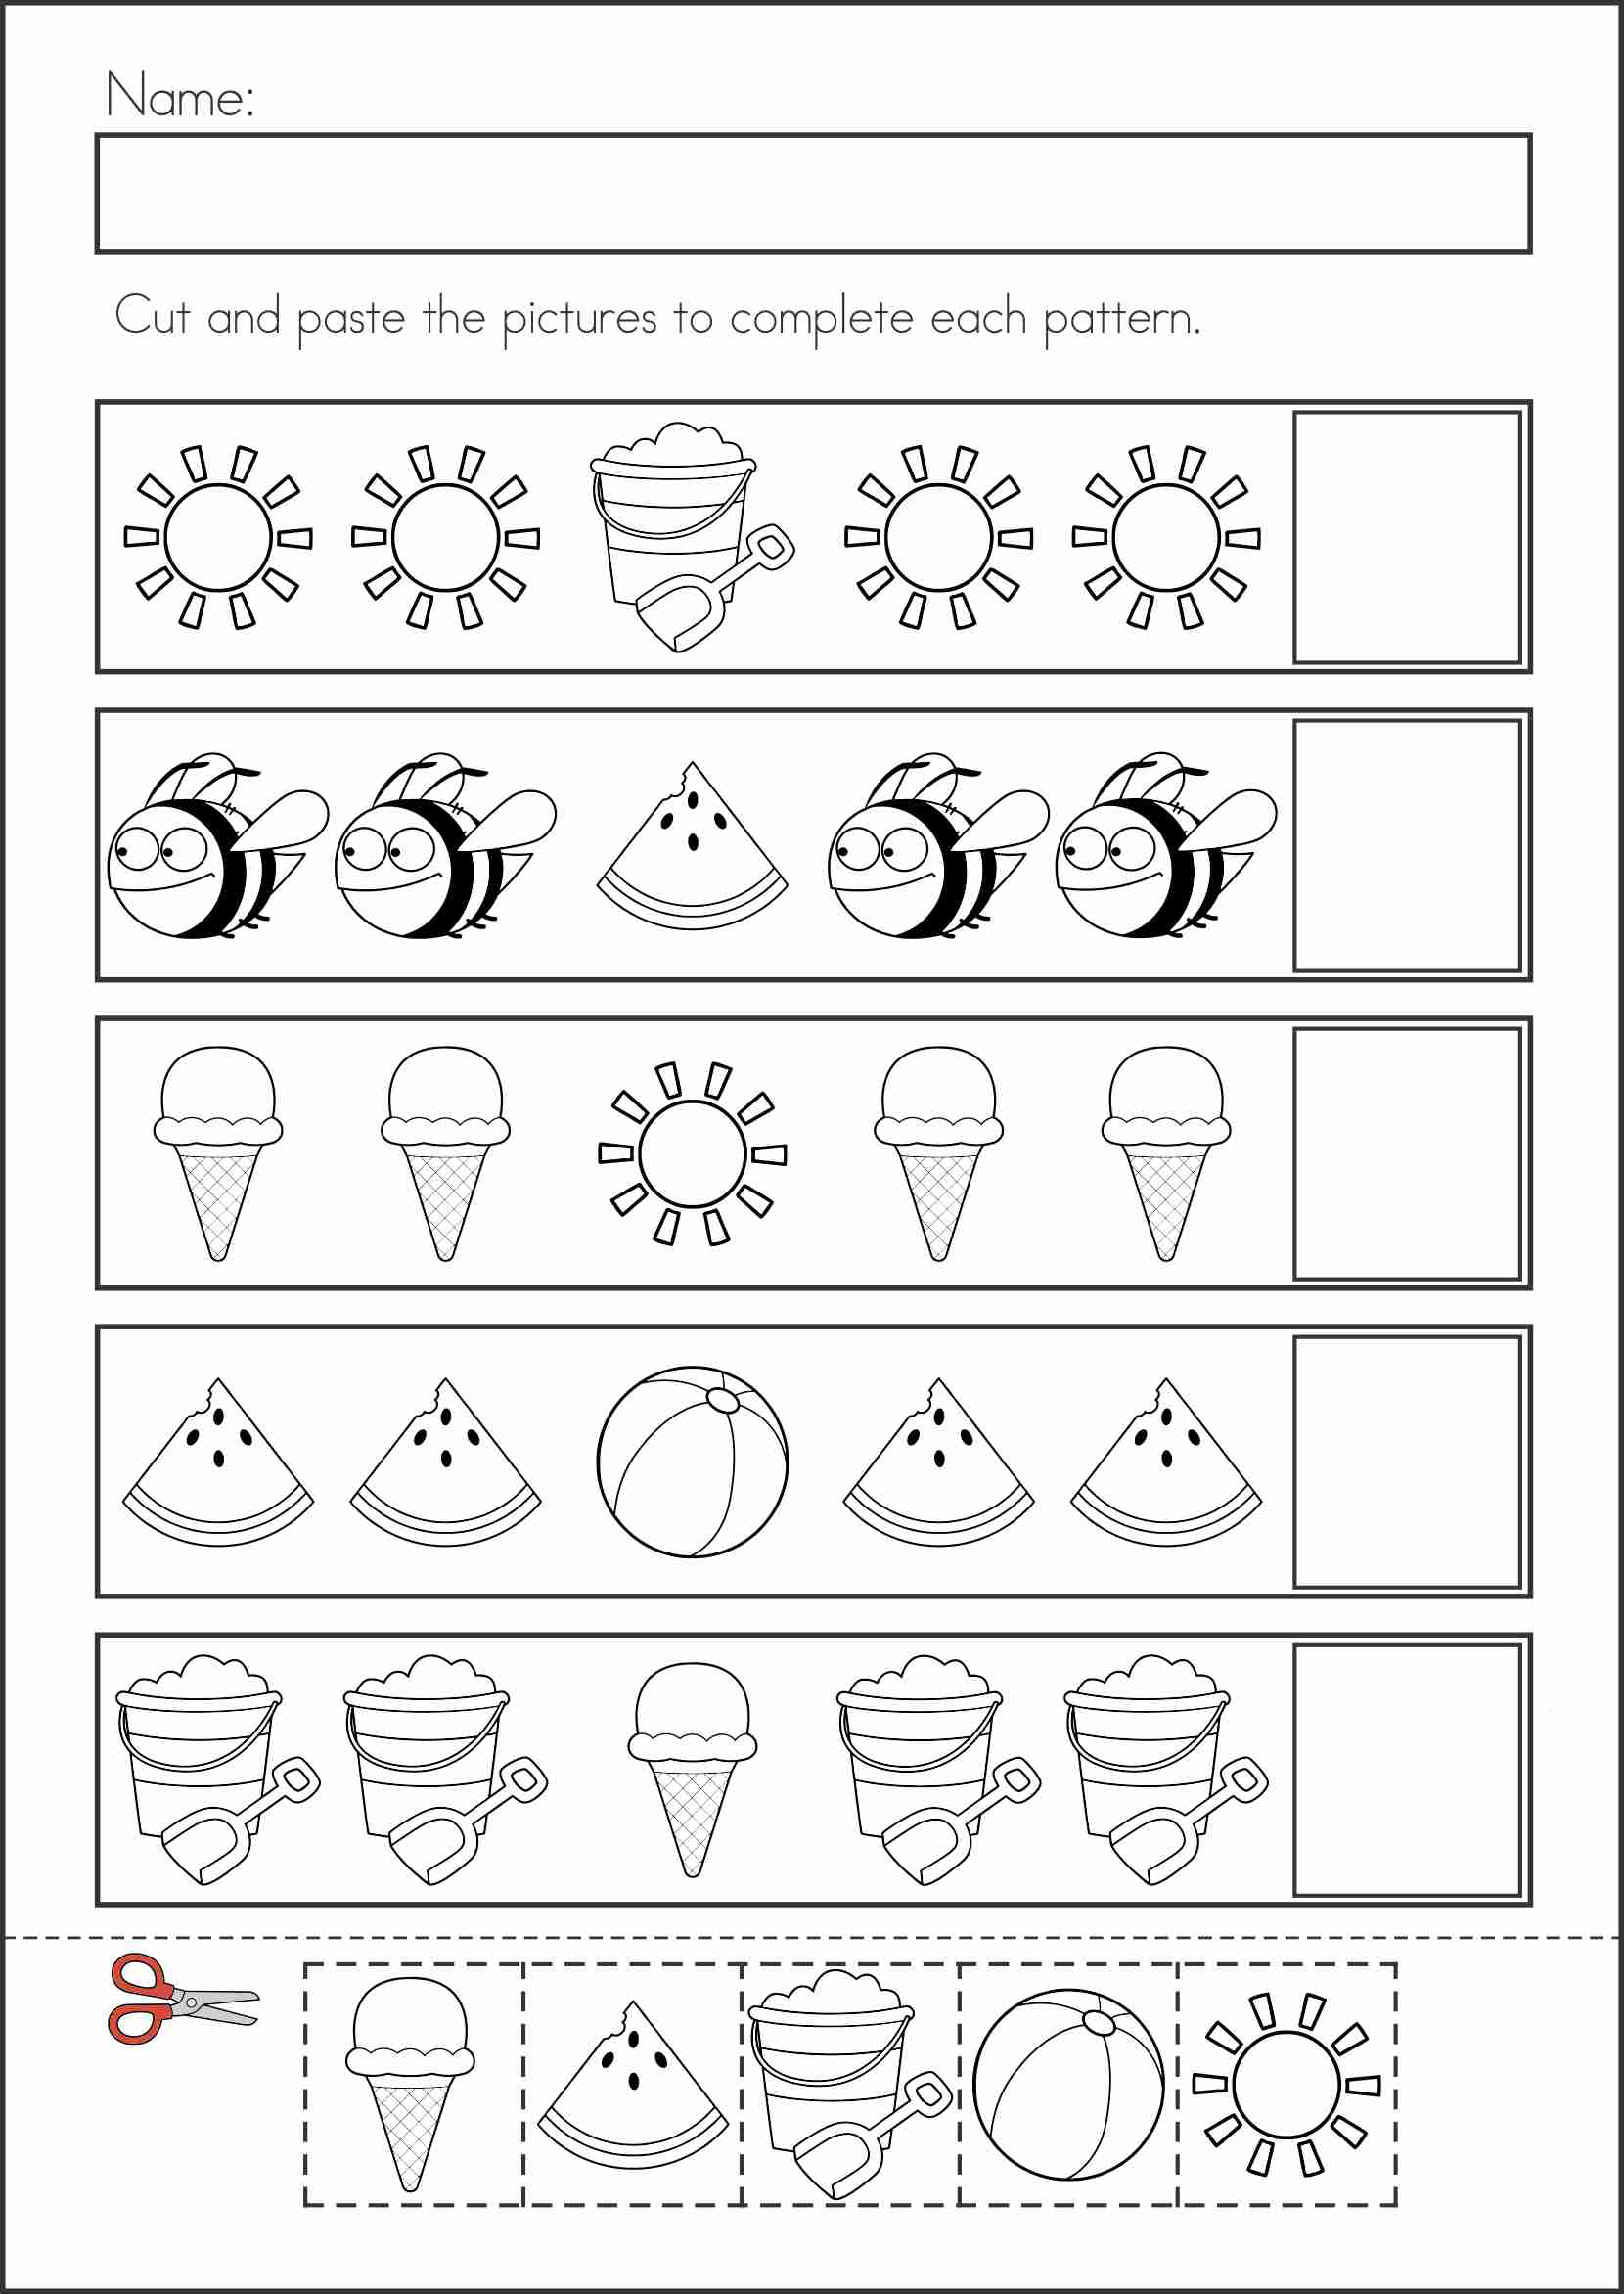 Free Printable Cut And Paste Pattern Worksheets Printable Templates